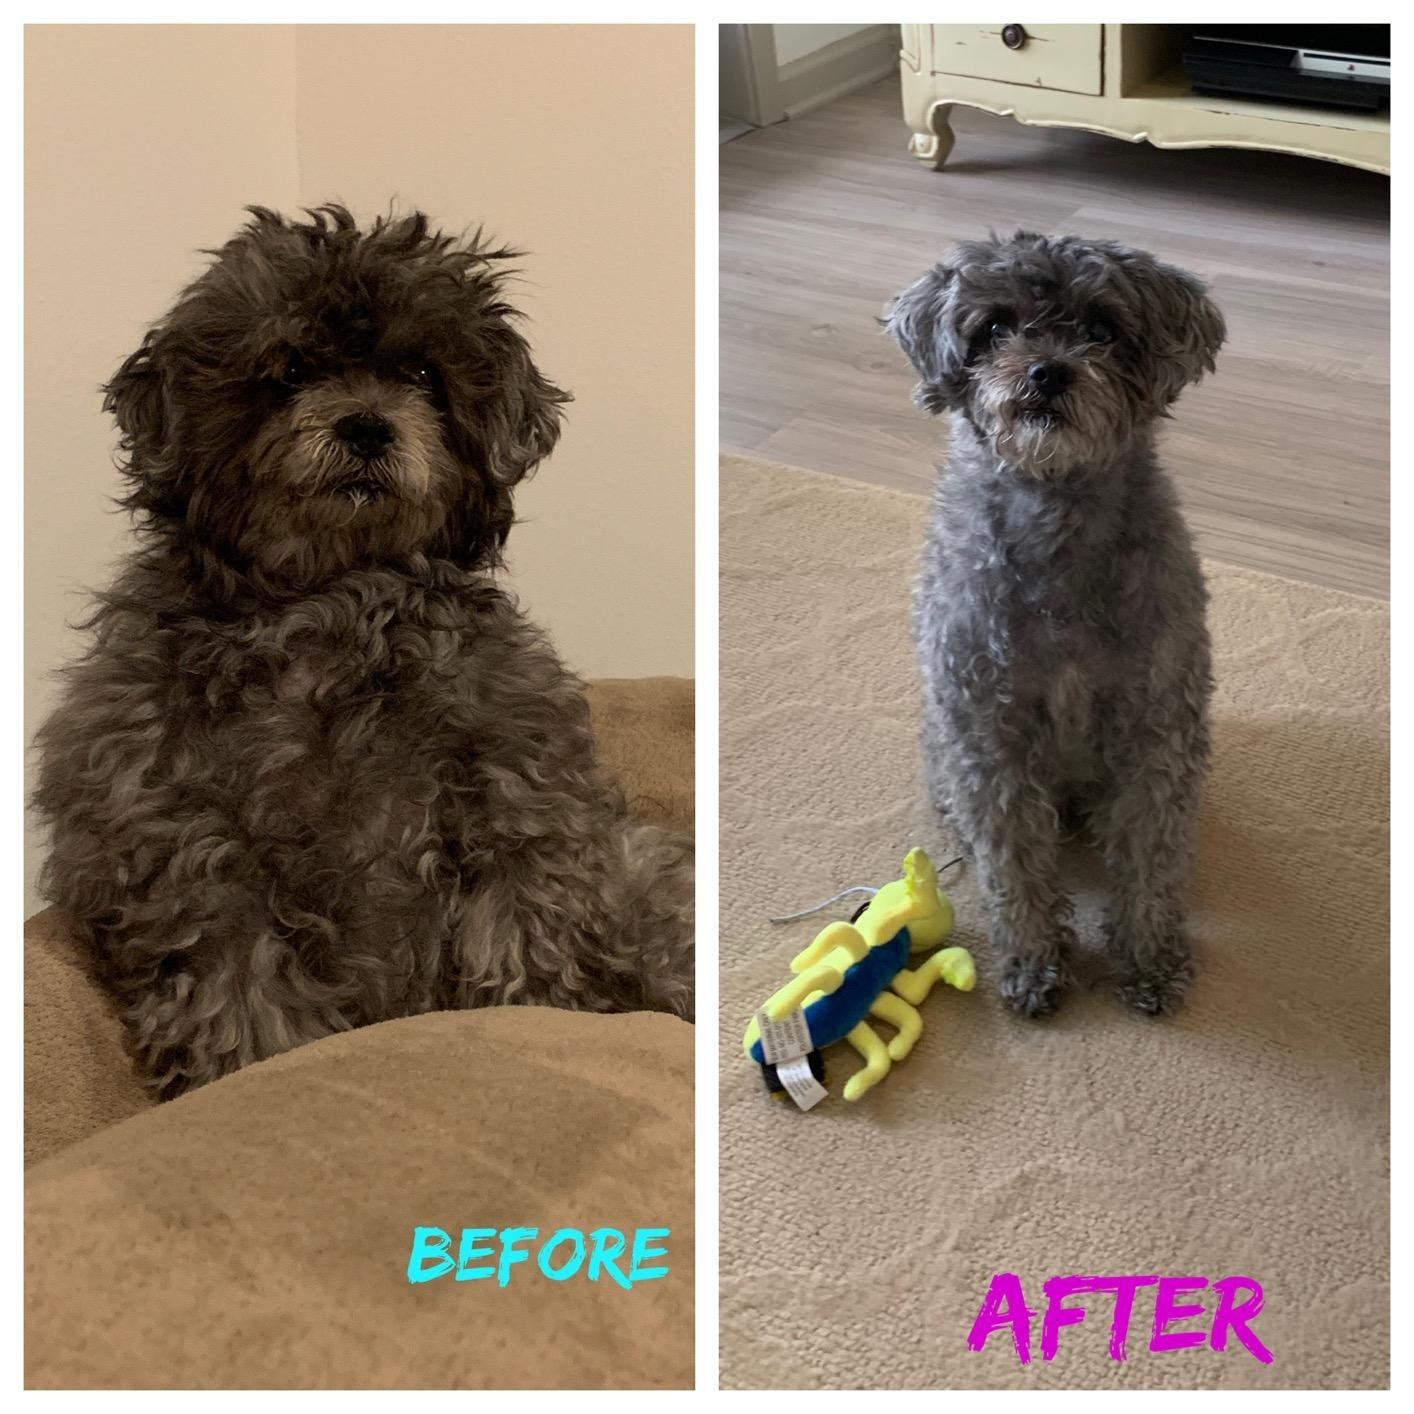 Before photo of reviewer&#x27;s dog with knotted, messy fur and after photo of the same dog looking neatly trimmed